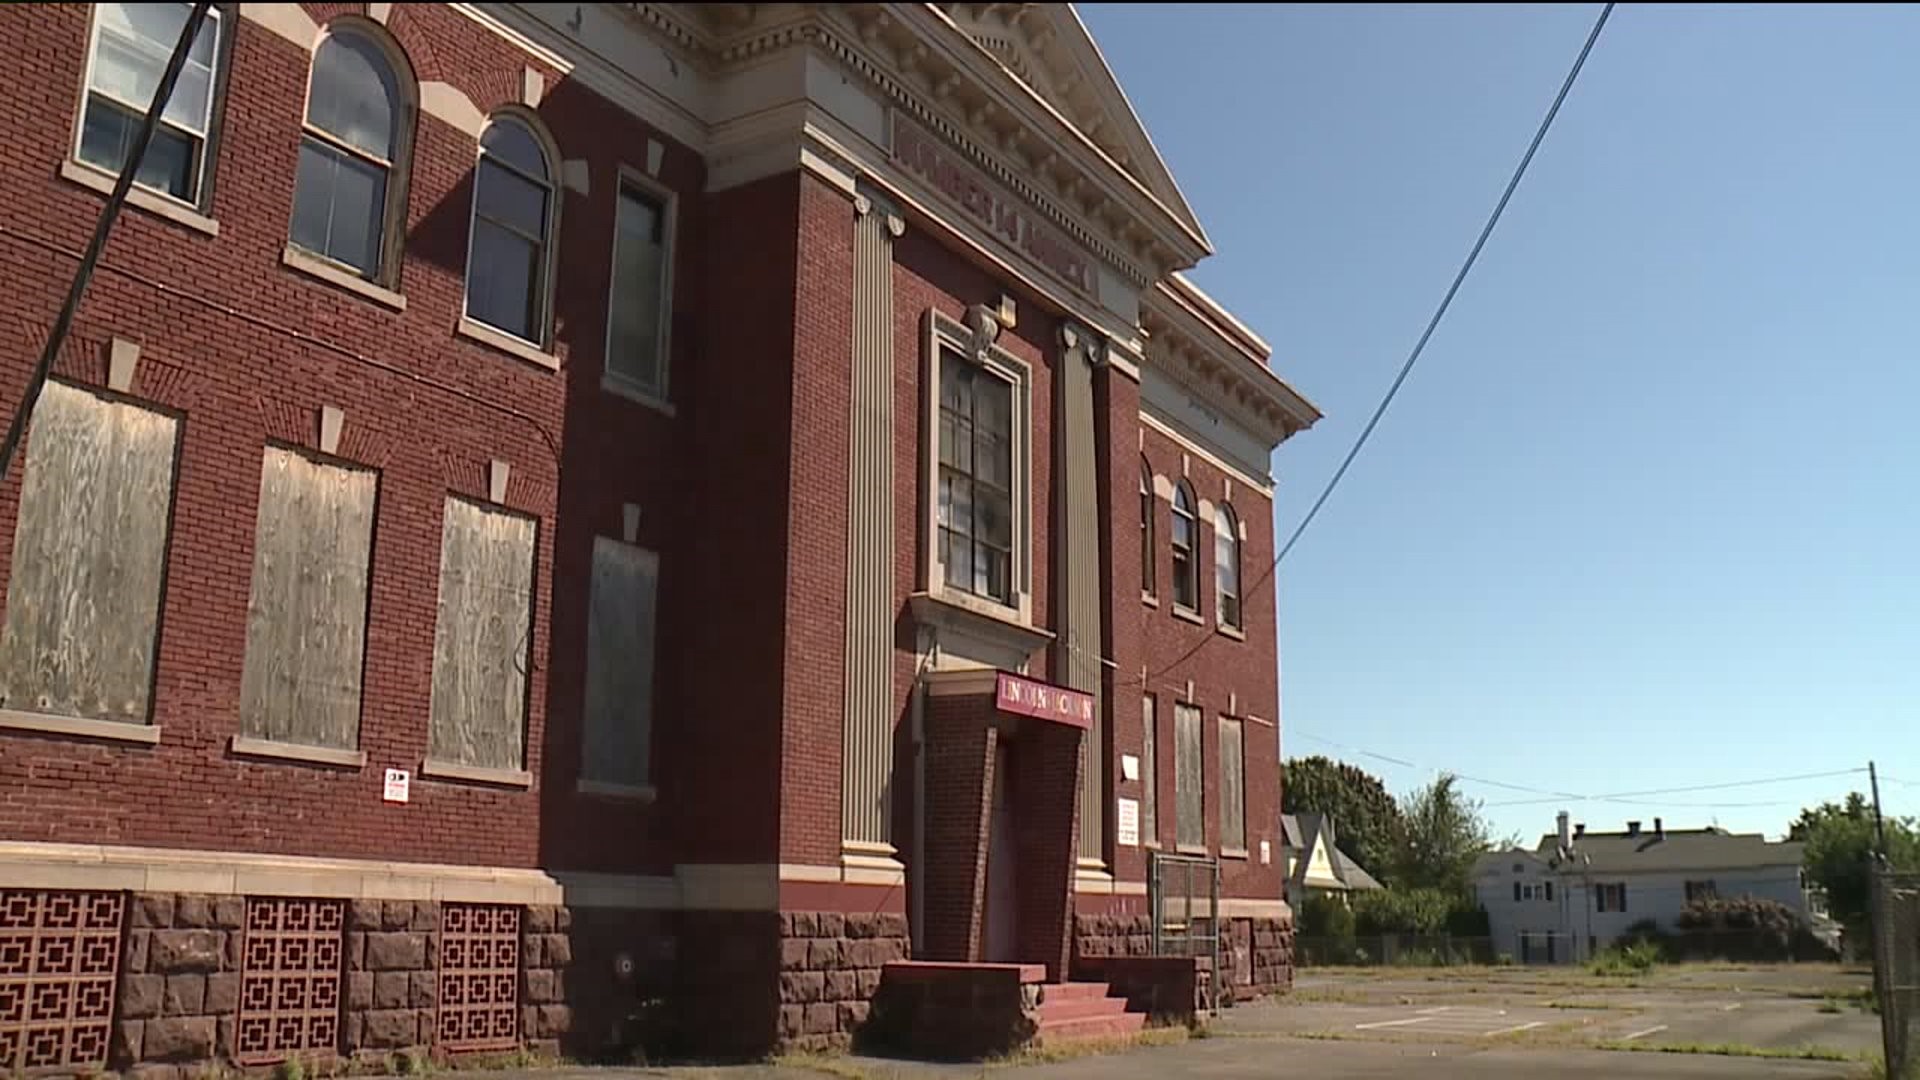 Vacant Scranton School Slated to Become Apartments wnep com